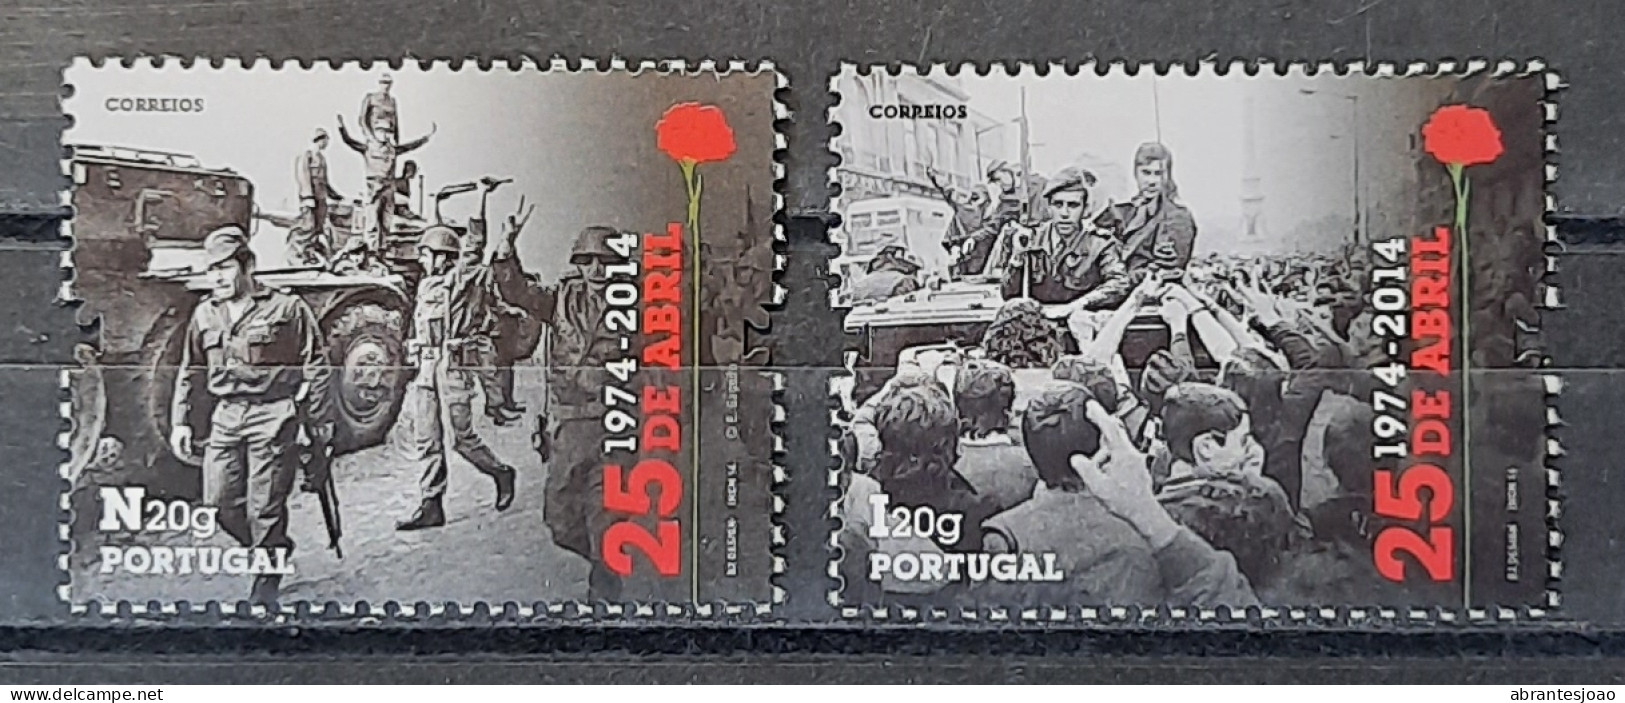 2014 - Portugal - 40 Years Of 25th April Revolution - MNH - 2 Stamps + Souvenir Sheet Of 1 Stamp - Ungebraucht